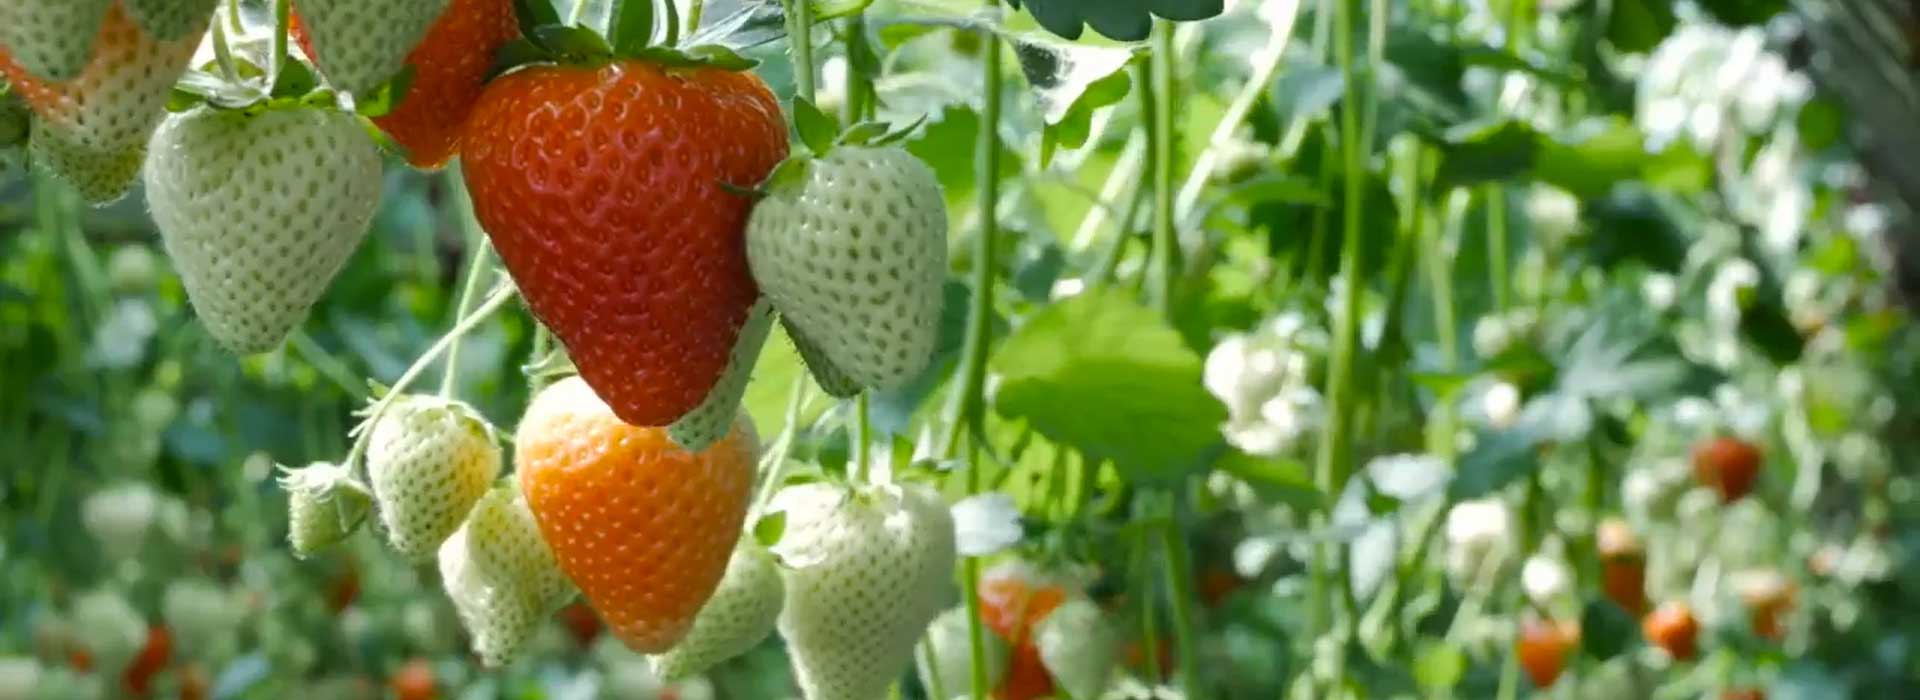 hydroponic strawberry greenhouse investment